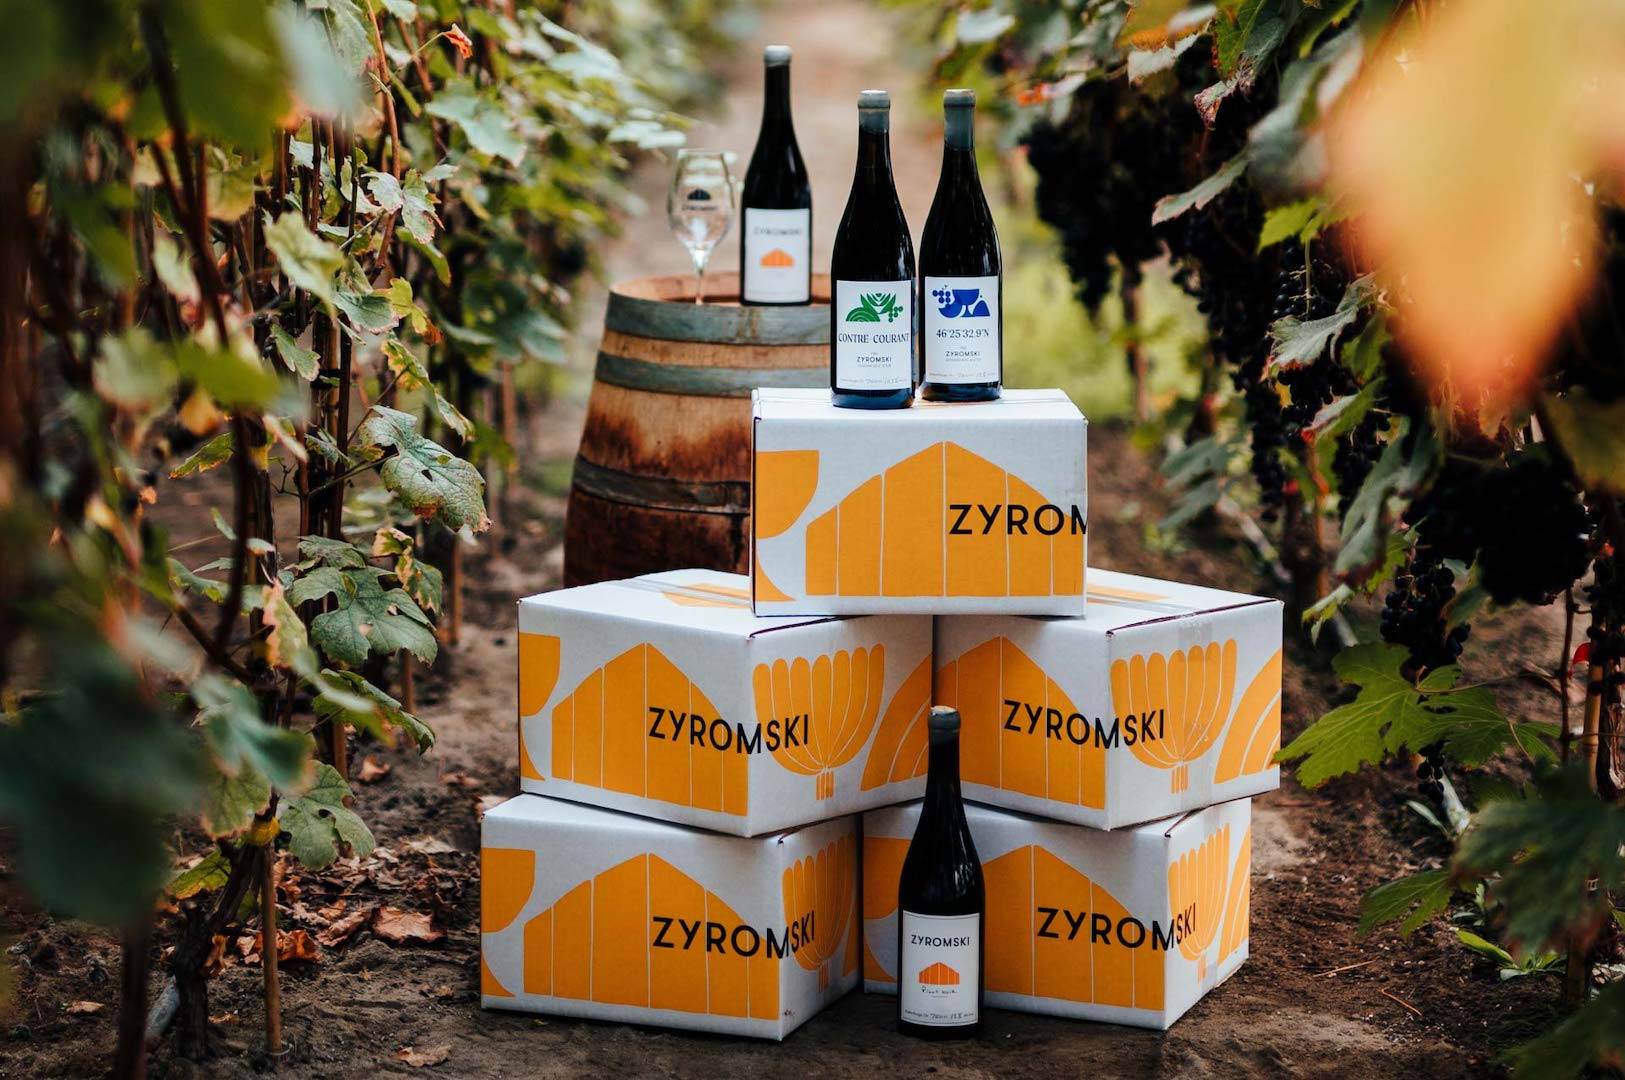 Zyromski wine cases with yellow graphic elements, echoing the design of the different bottles